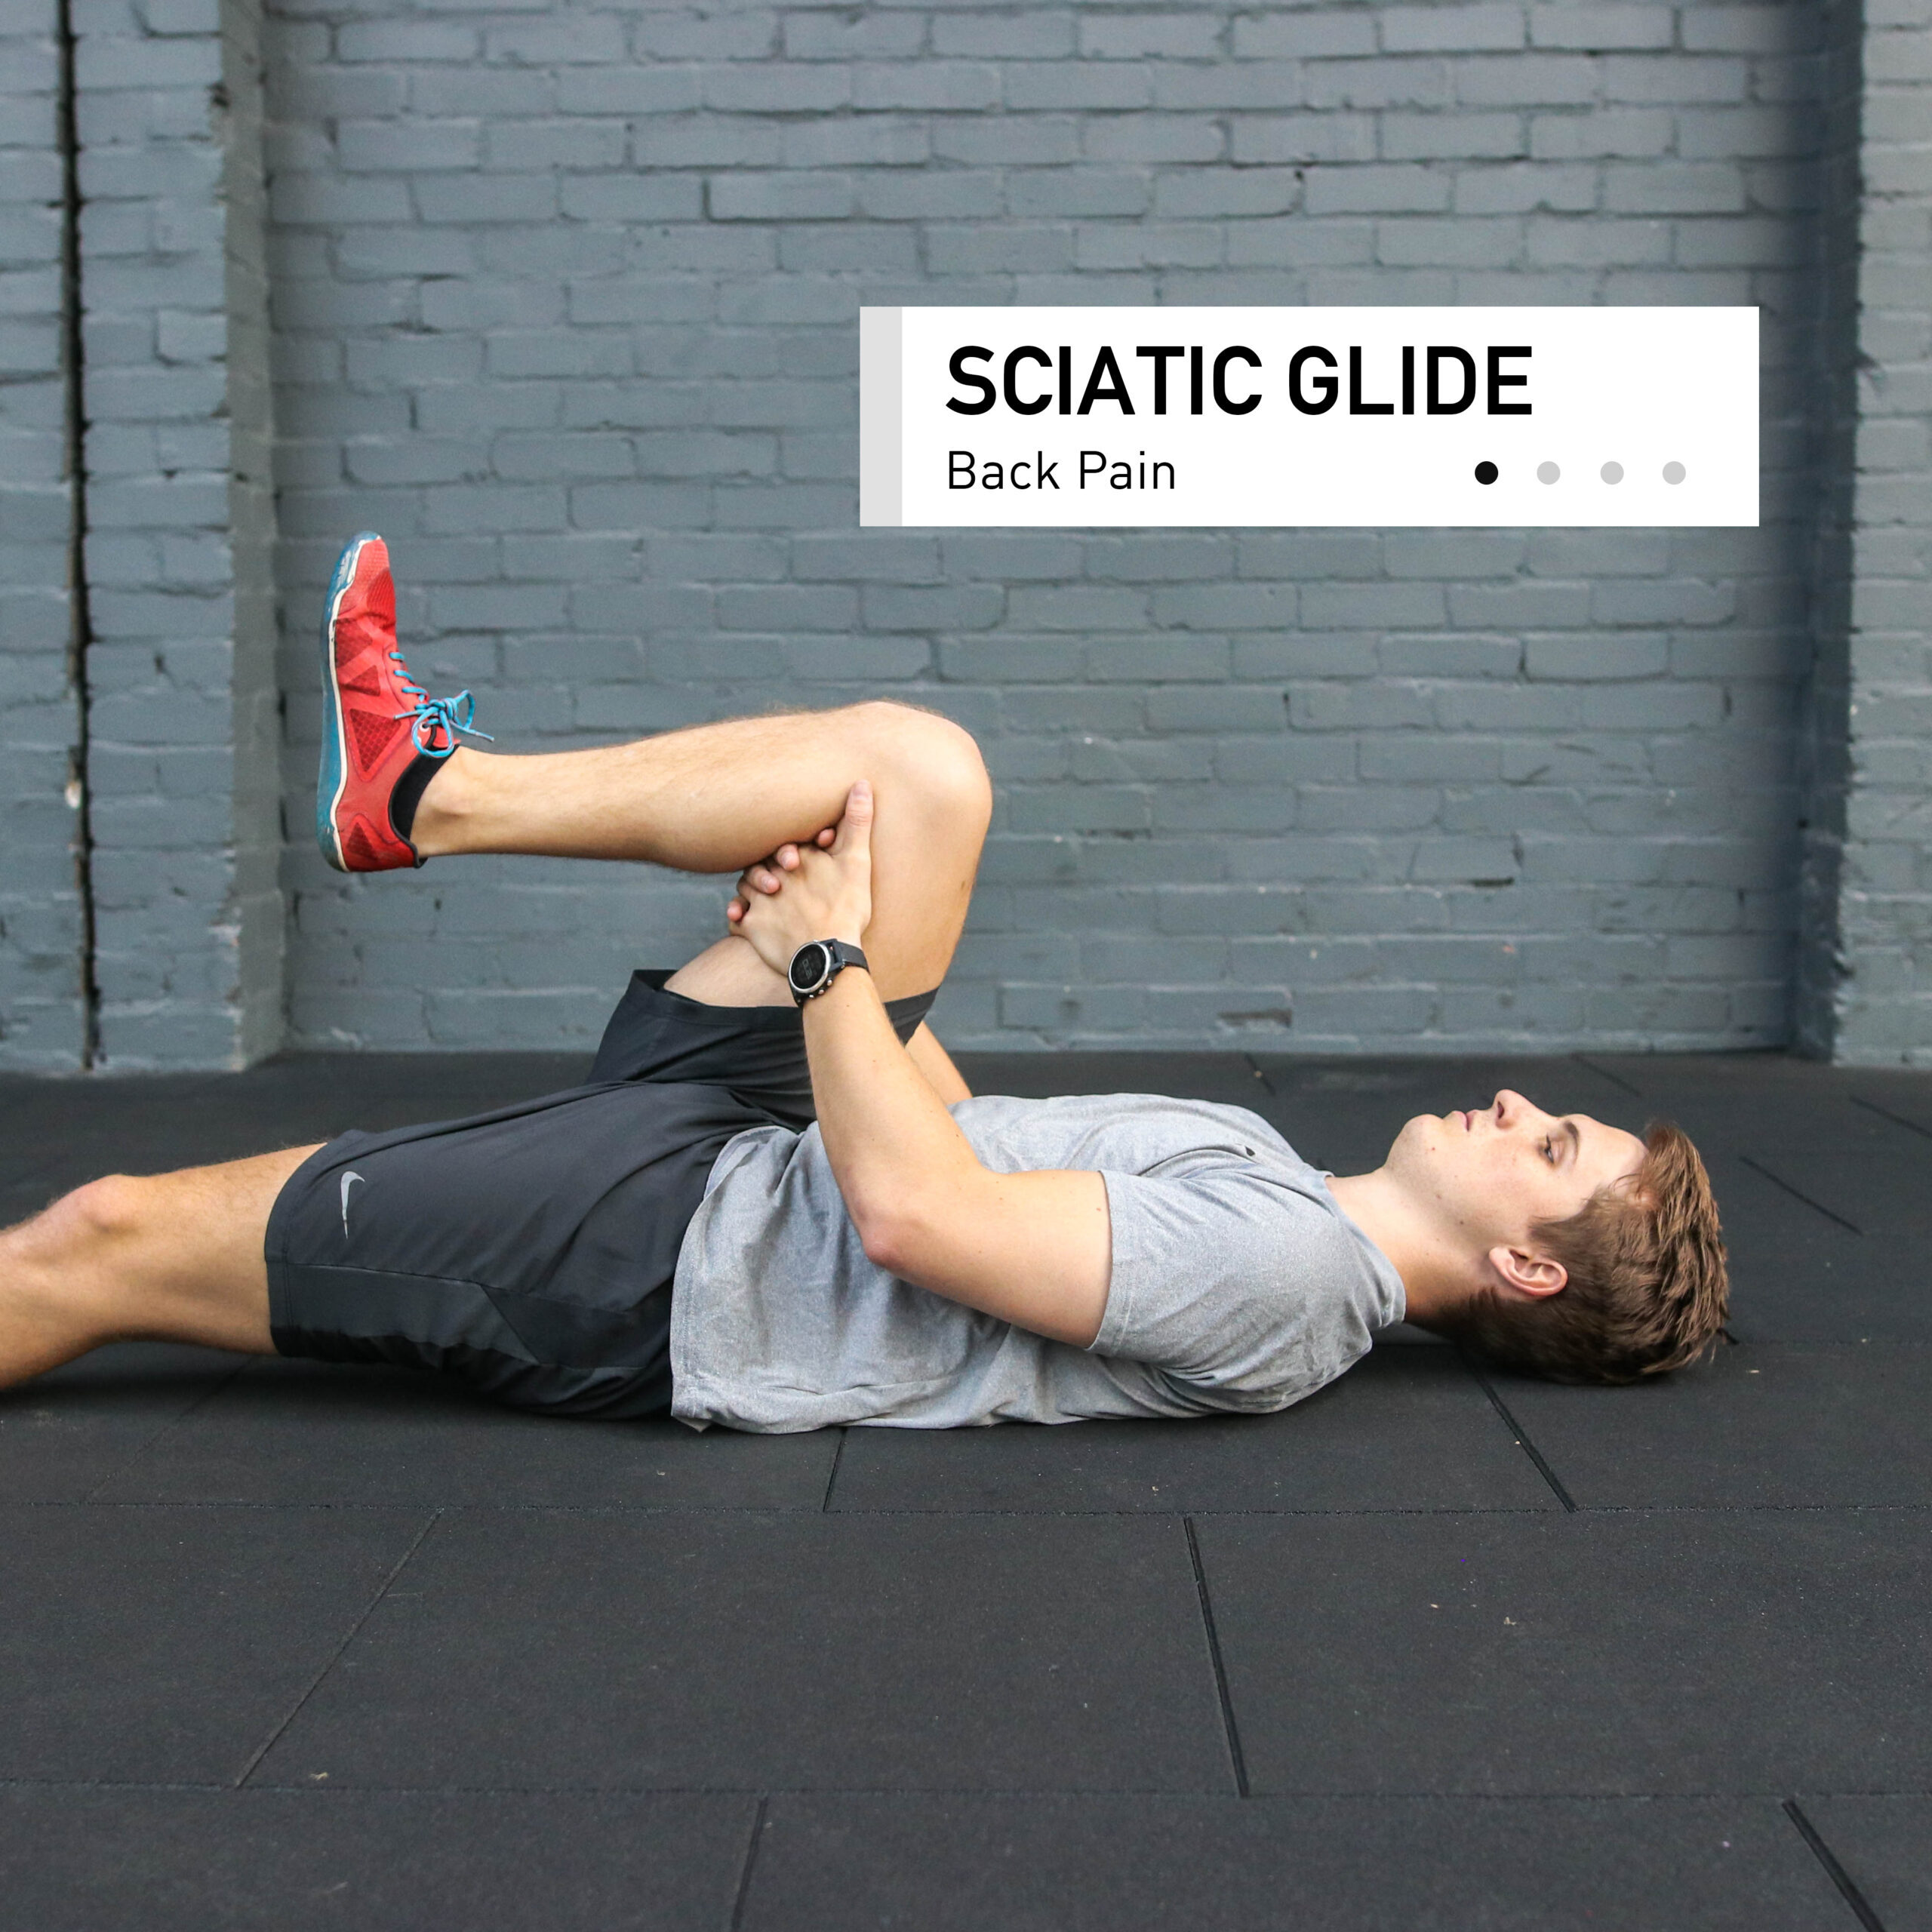 Sciatic glide exercise for back pain. Arwel Roberts Osteopathy, Neath, Cardiff, Swansea, South Wales.